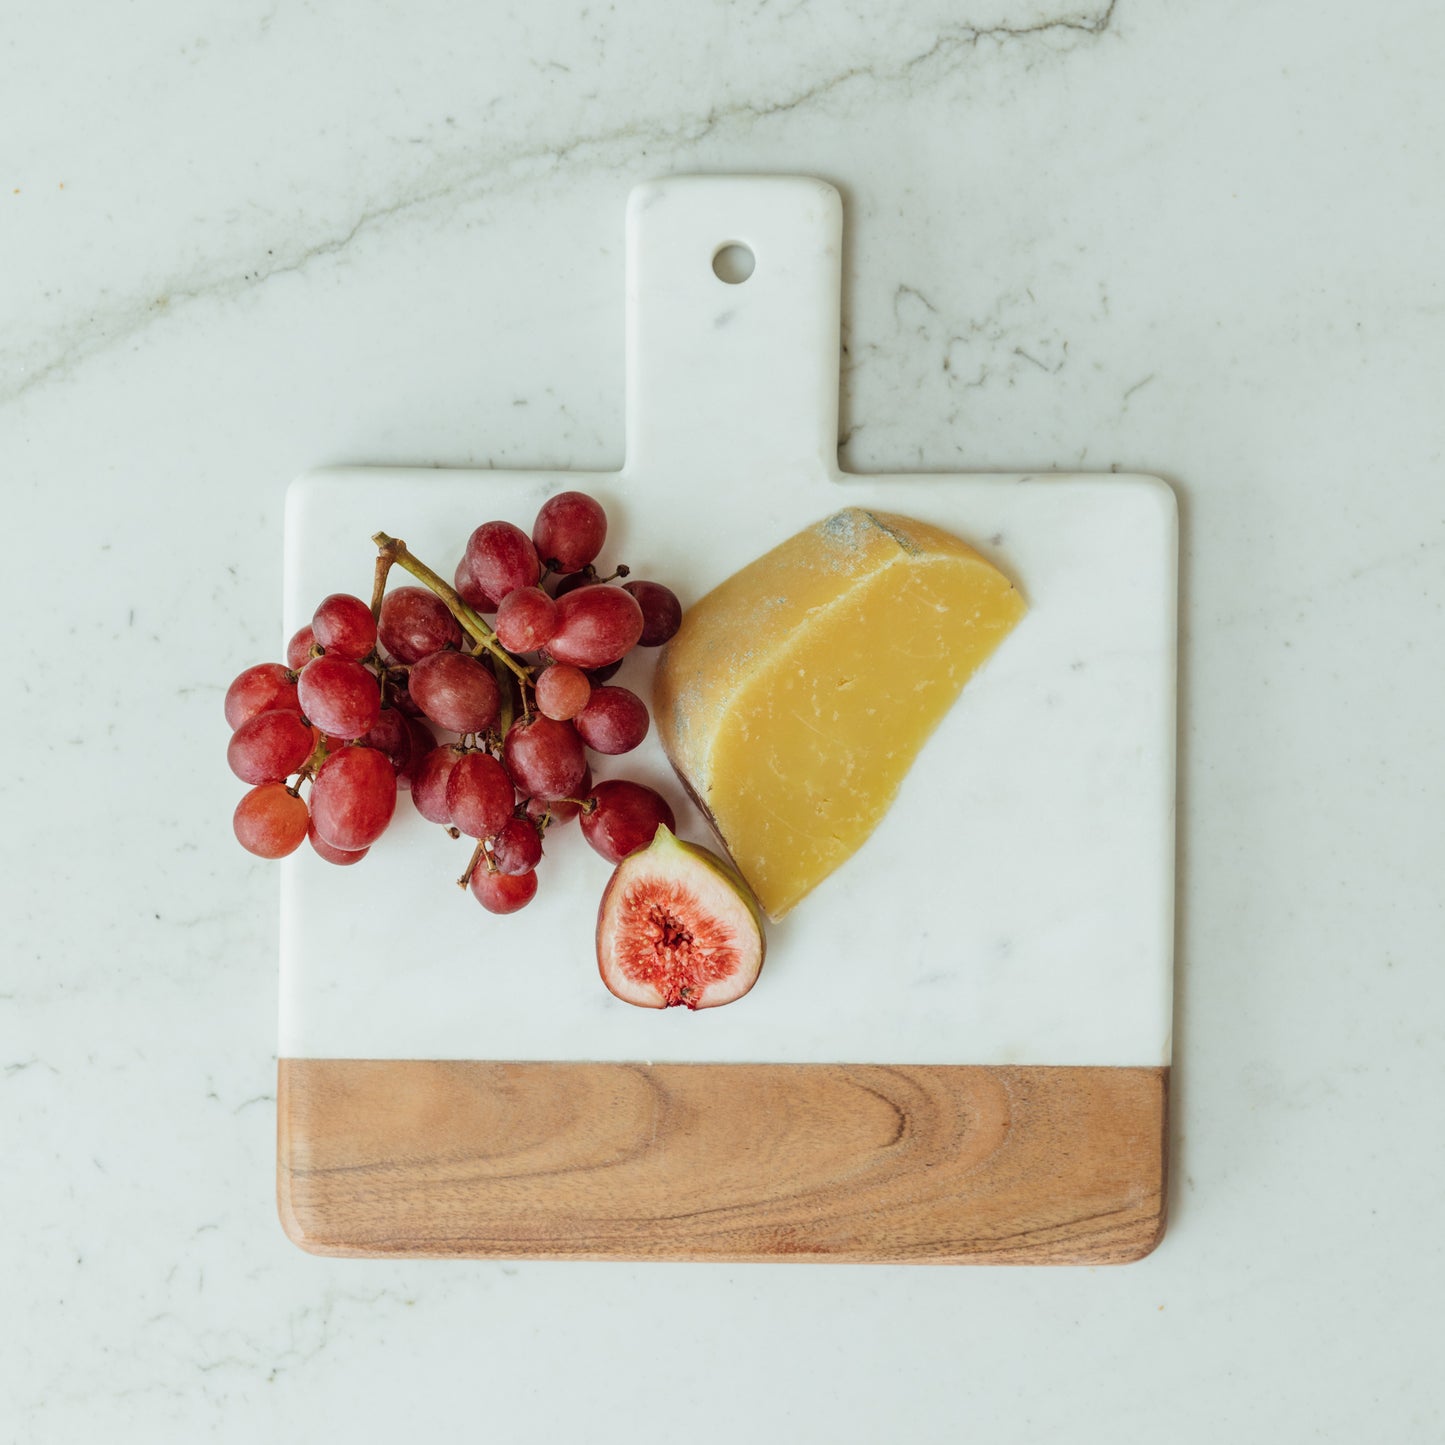 White marble & wood square cutting board